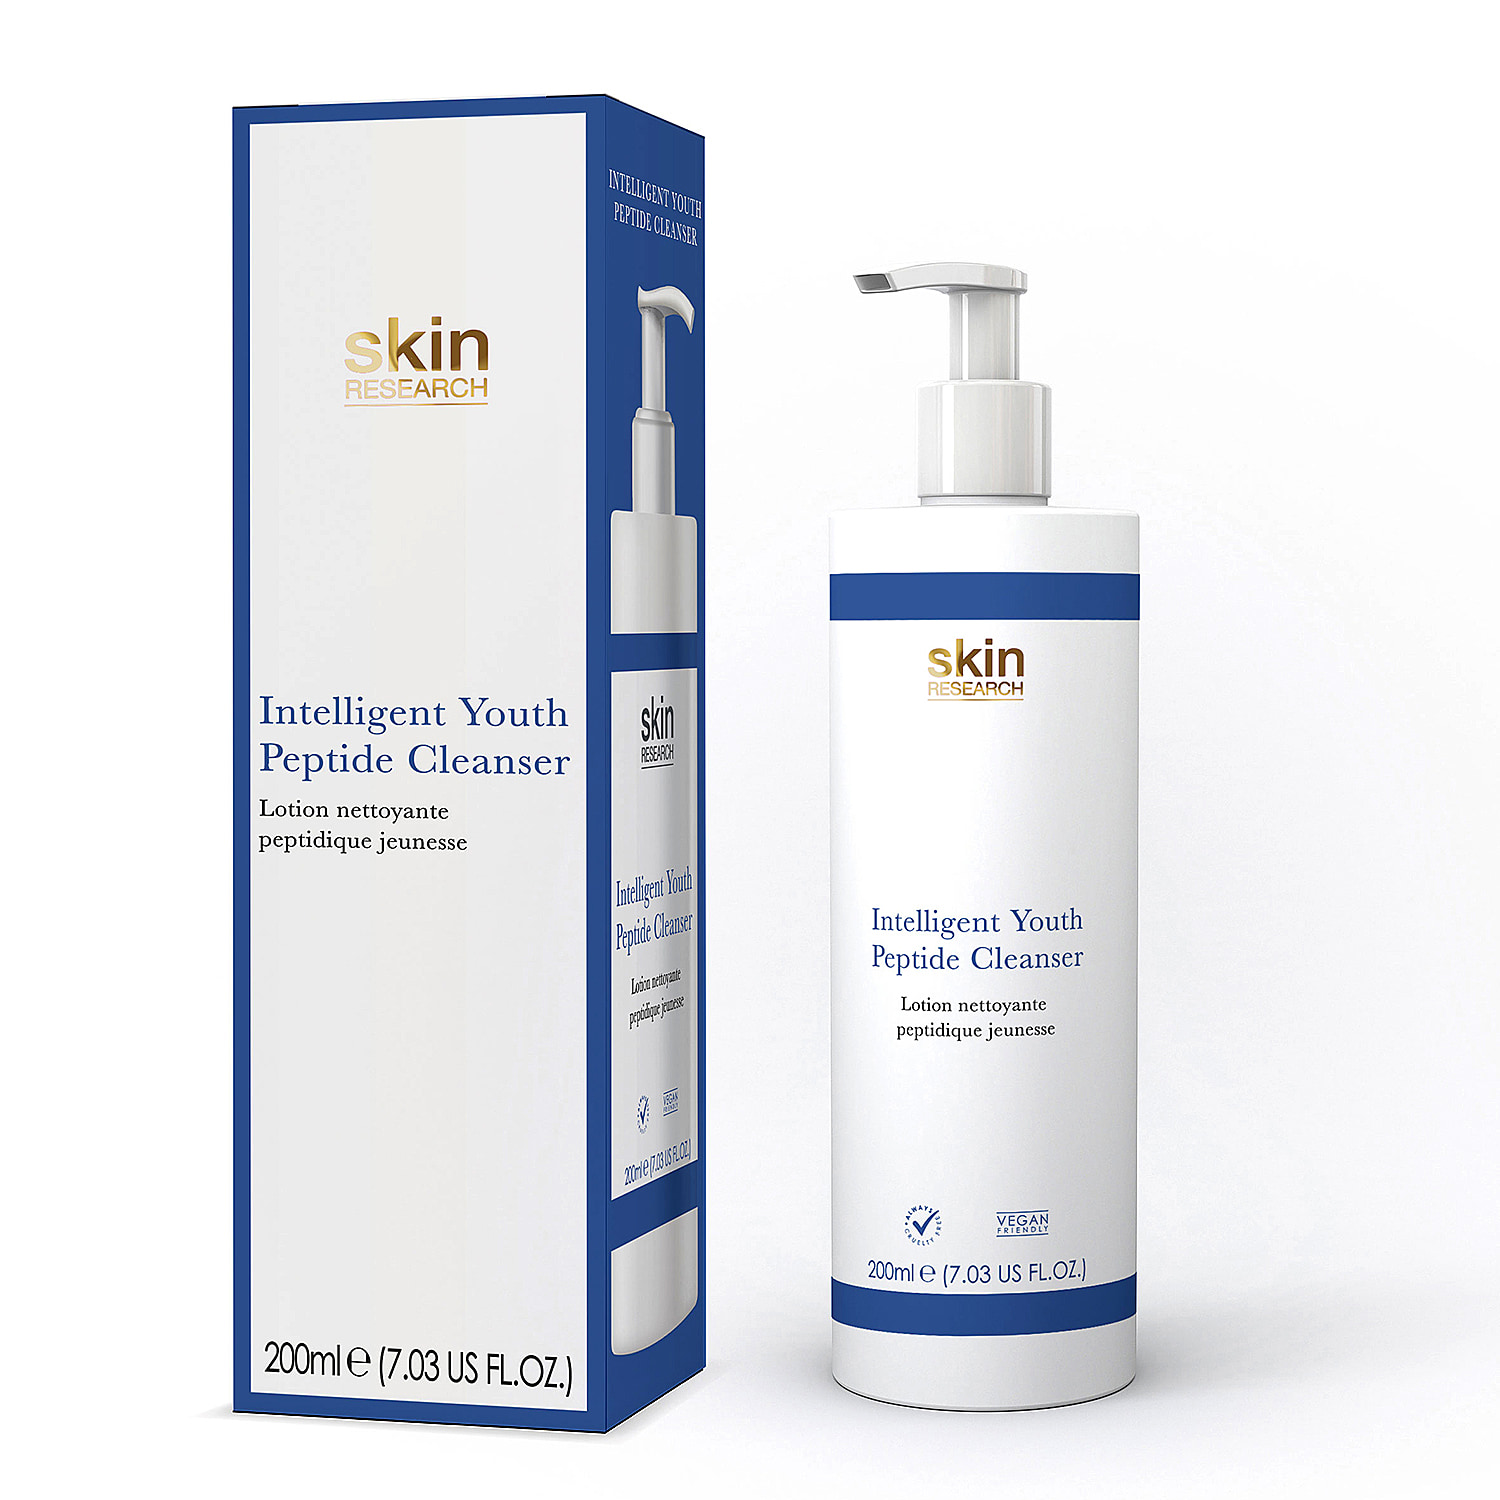 Skin Research Intelligent Youth Peptide Cleanser - 200m